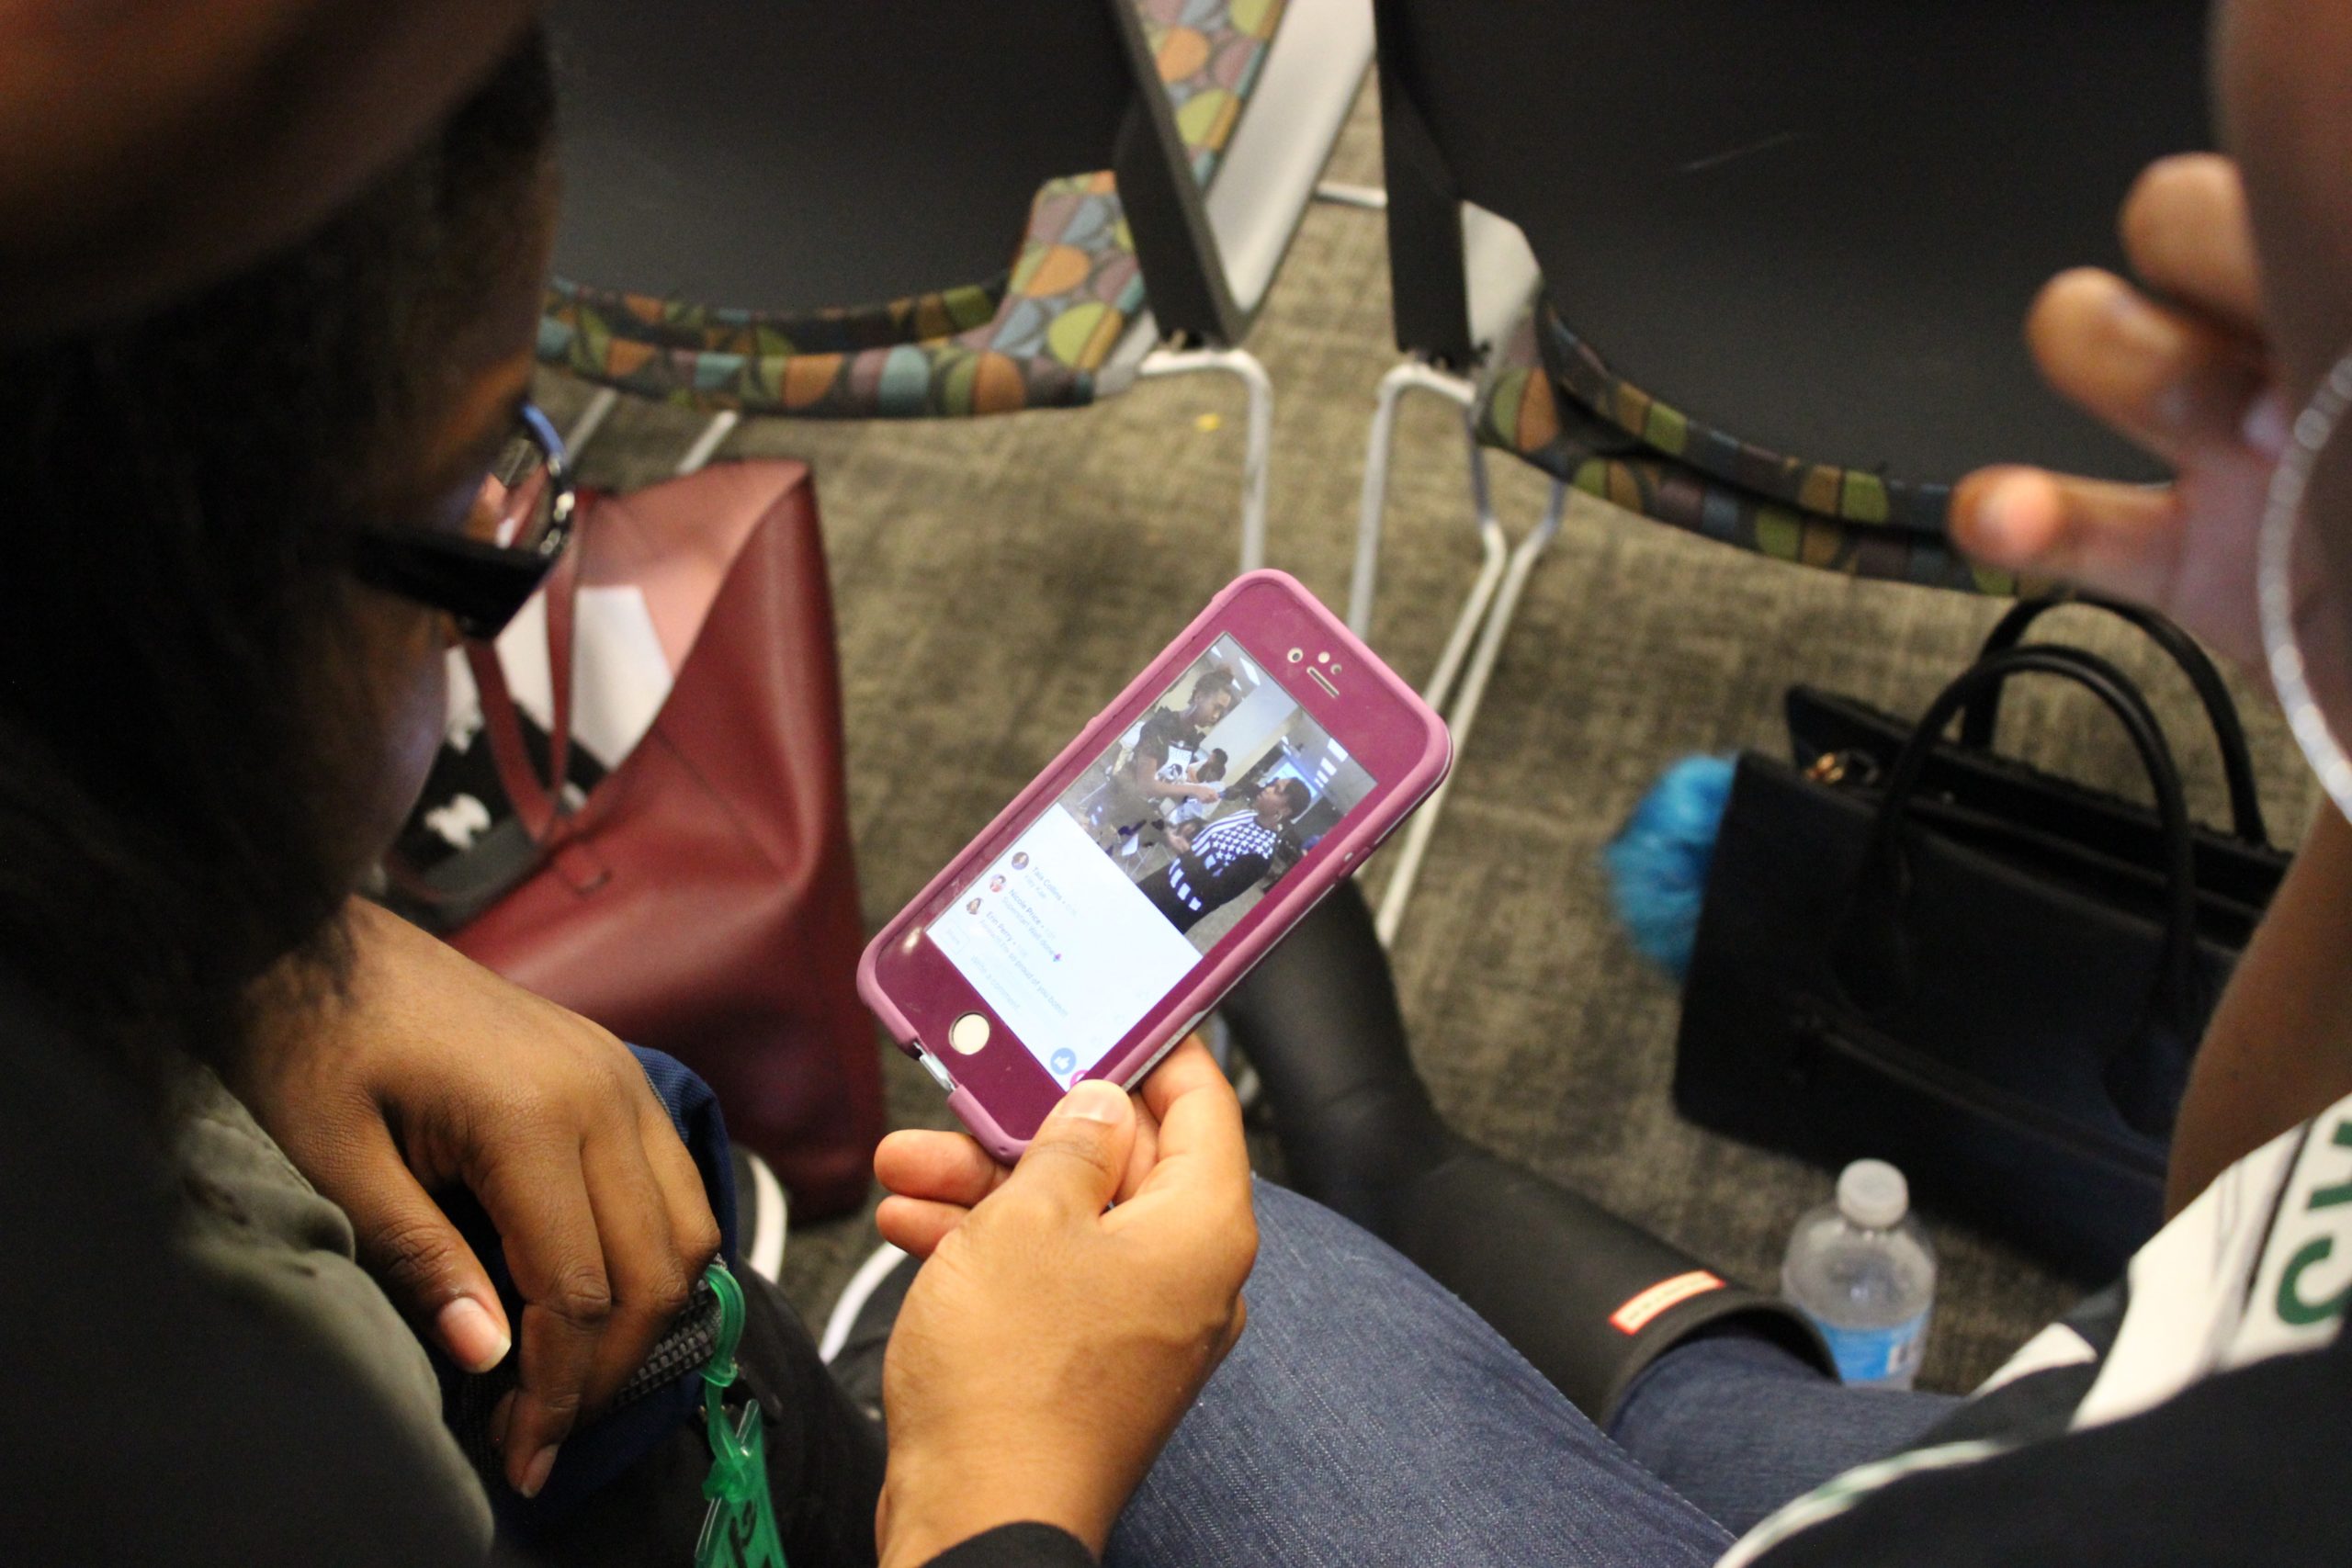 Student journalists in the Crain MSU Detroit High School Journalism program produced a Facebook Live segment during their Training Day event.